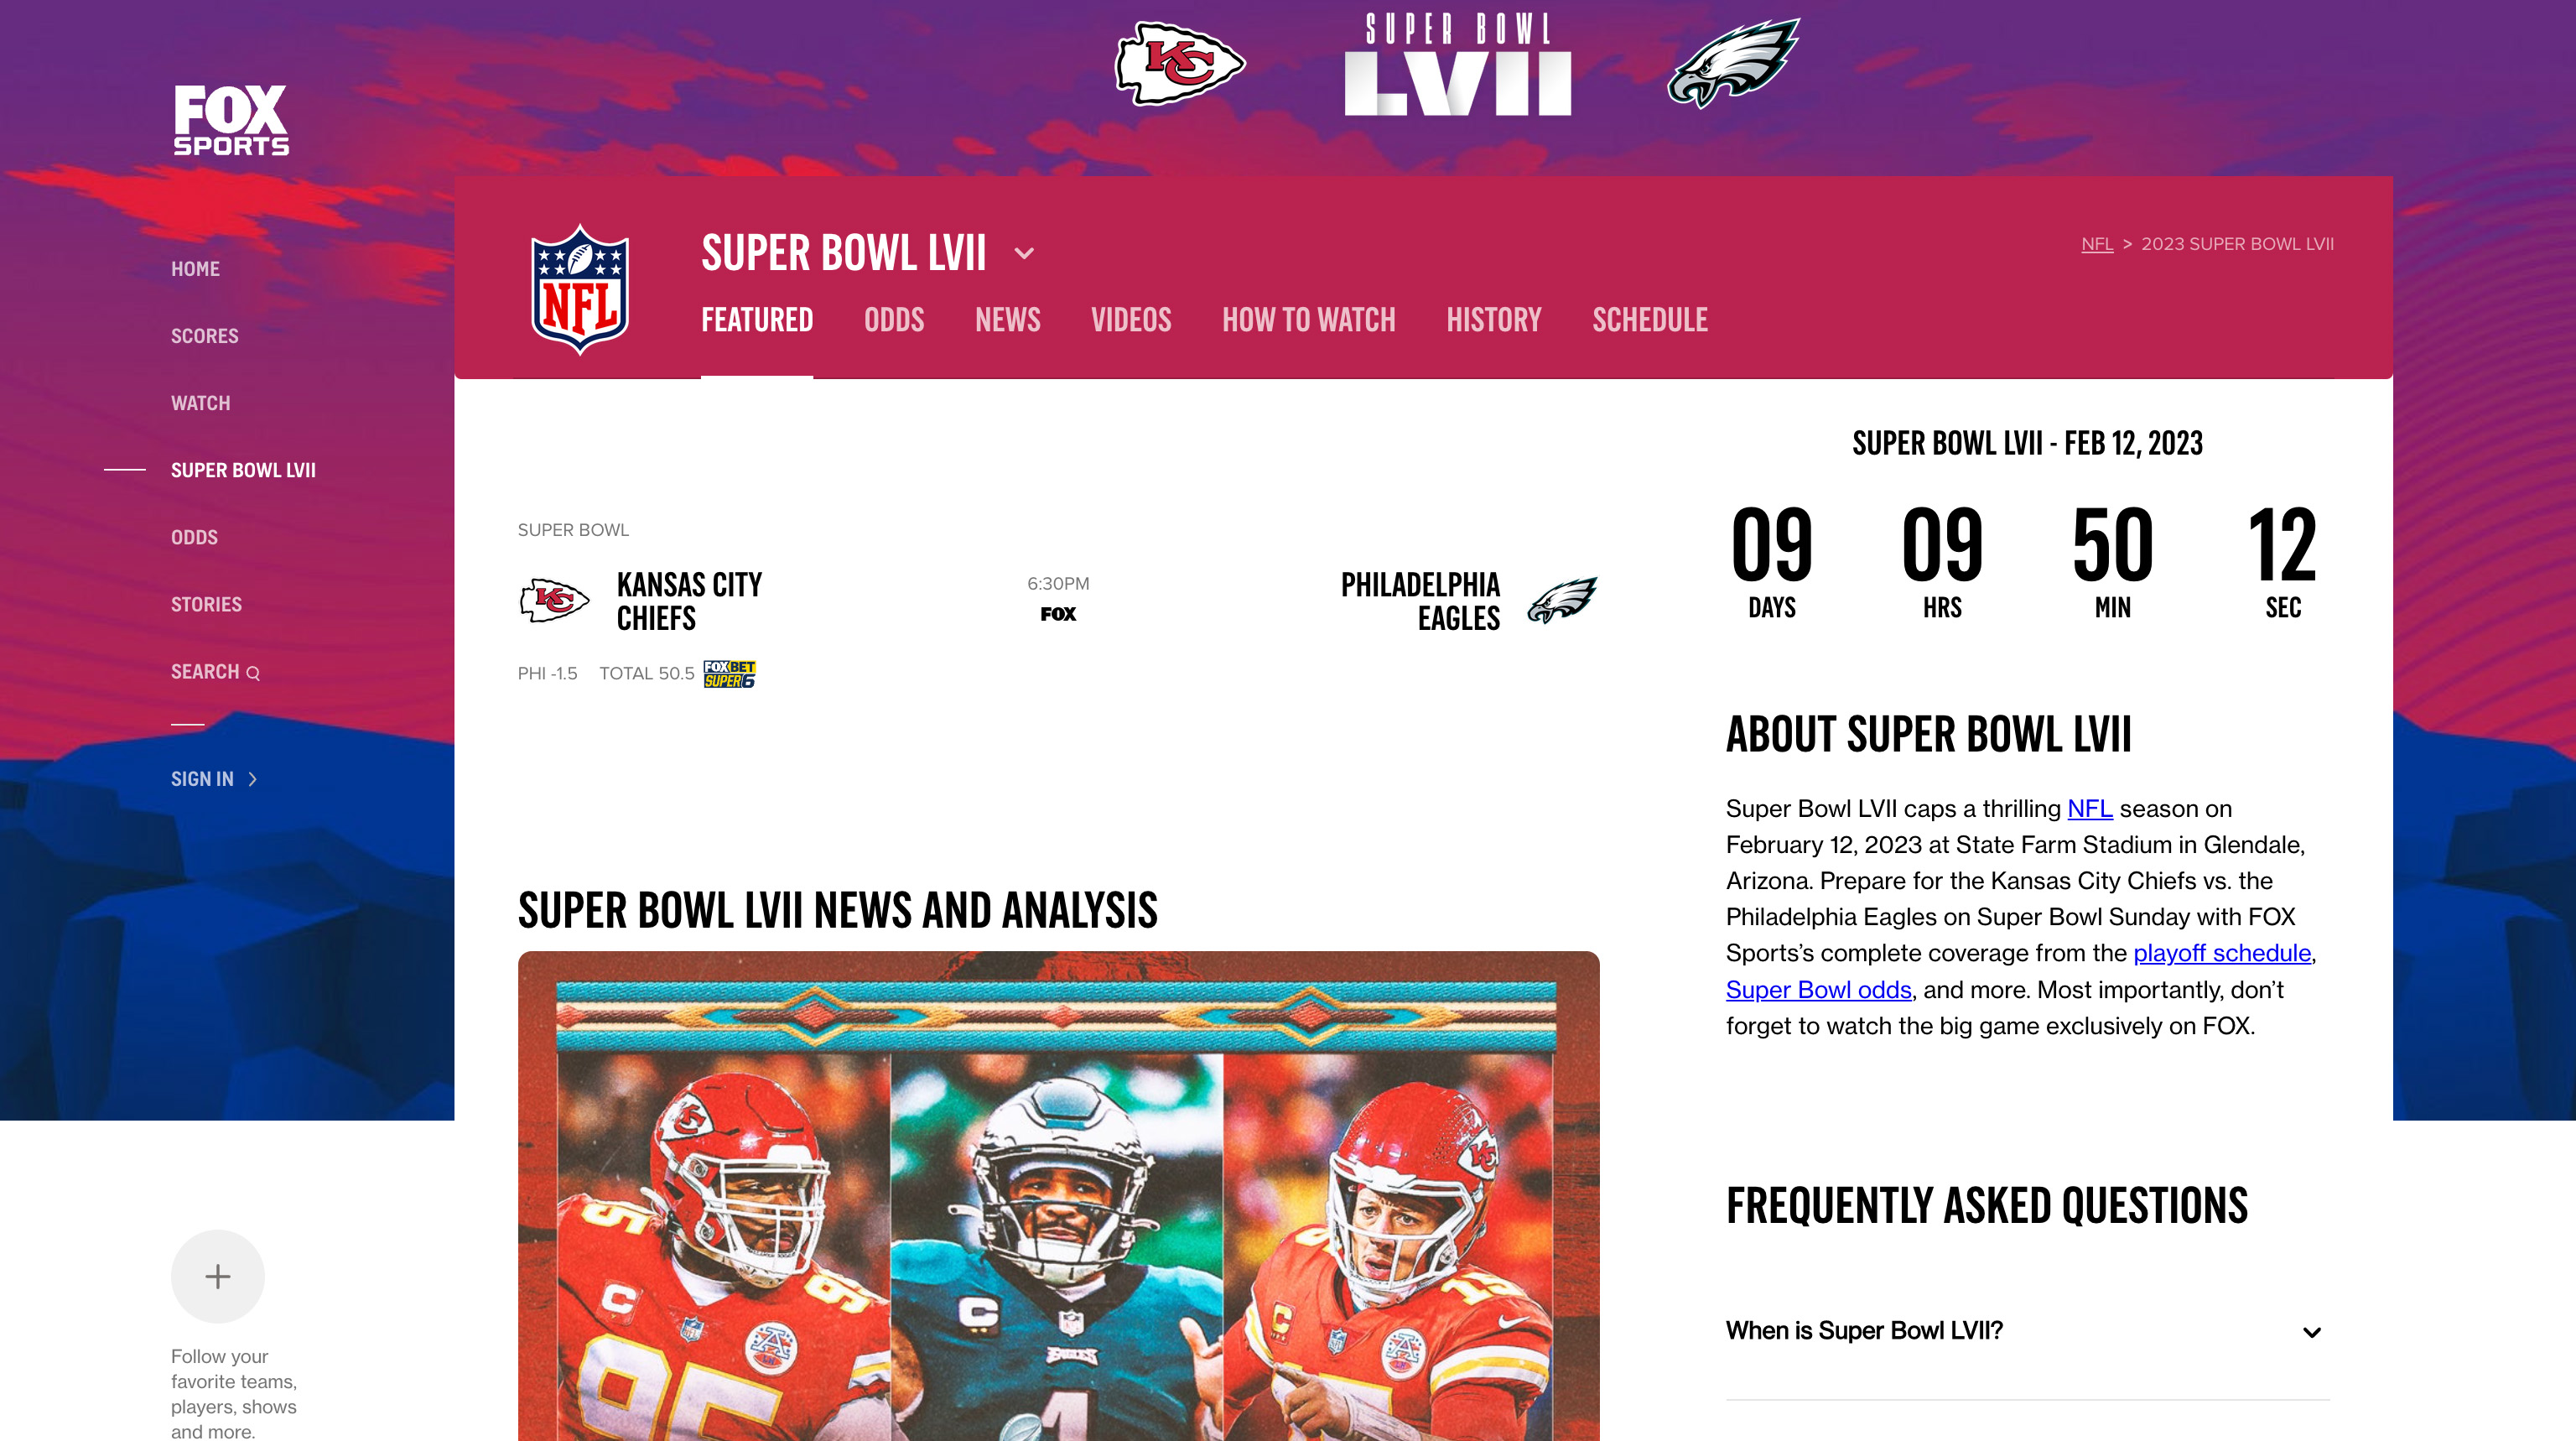 Here is how to watch the Super Bowl for free - The Manual